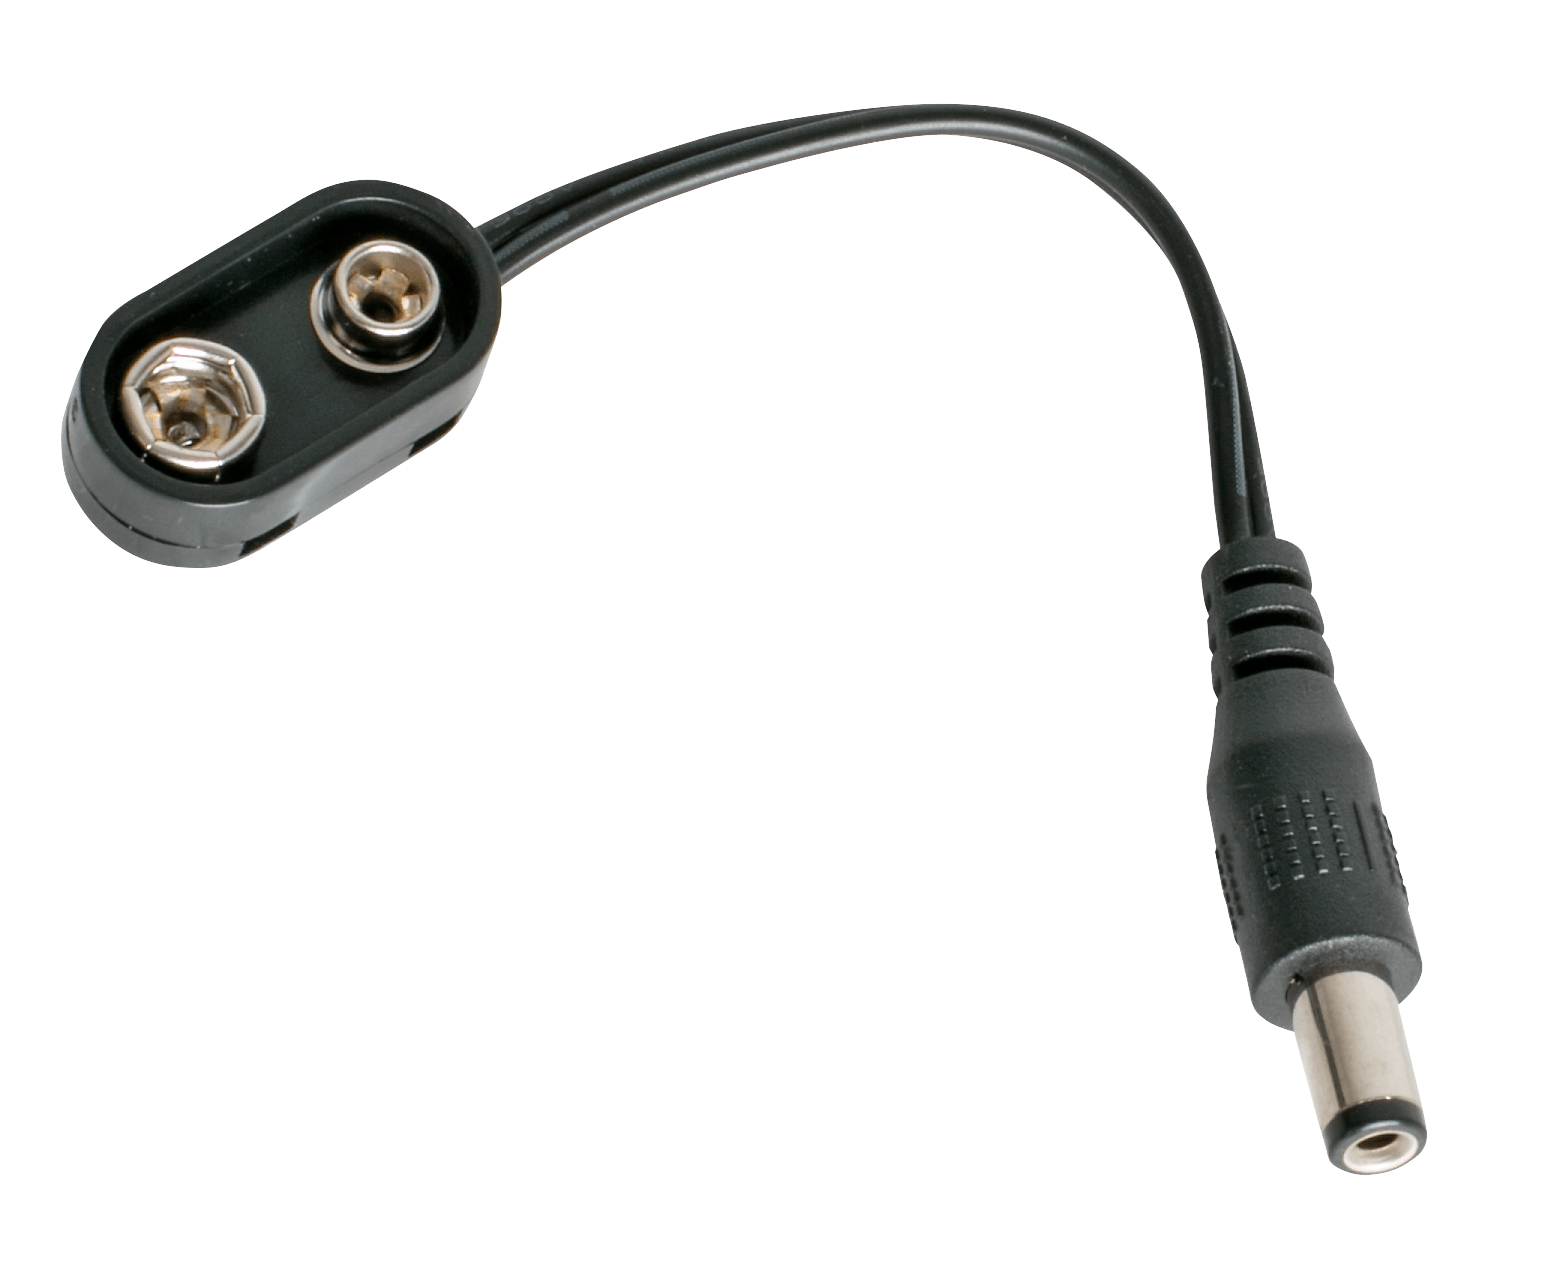 Carson Powerplay 9v Clip Adaptor - Accessories - Cables & Adaptors by Carson at Muso's Stuff